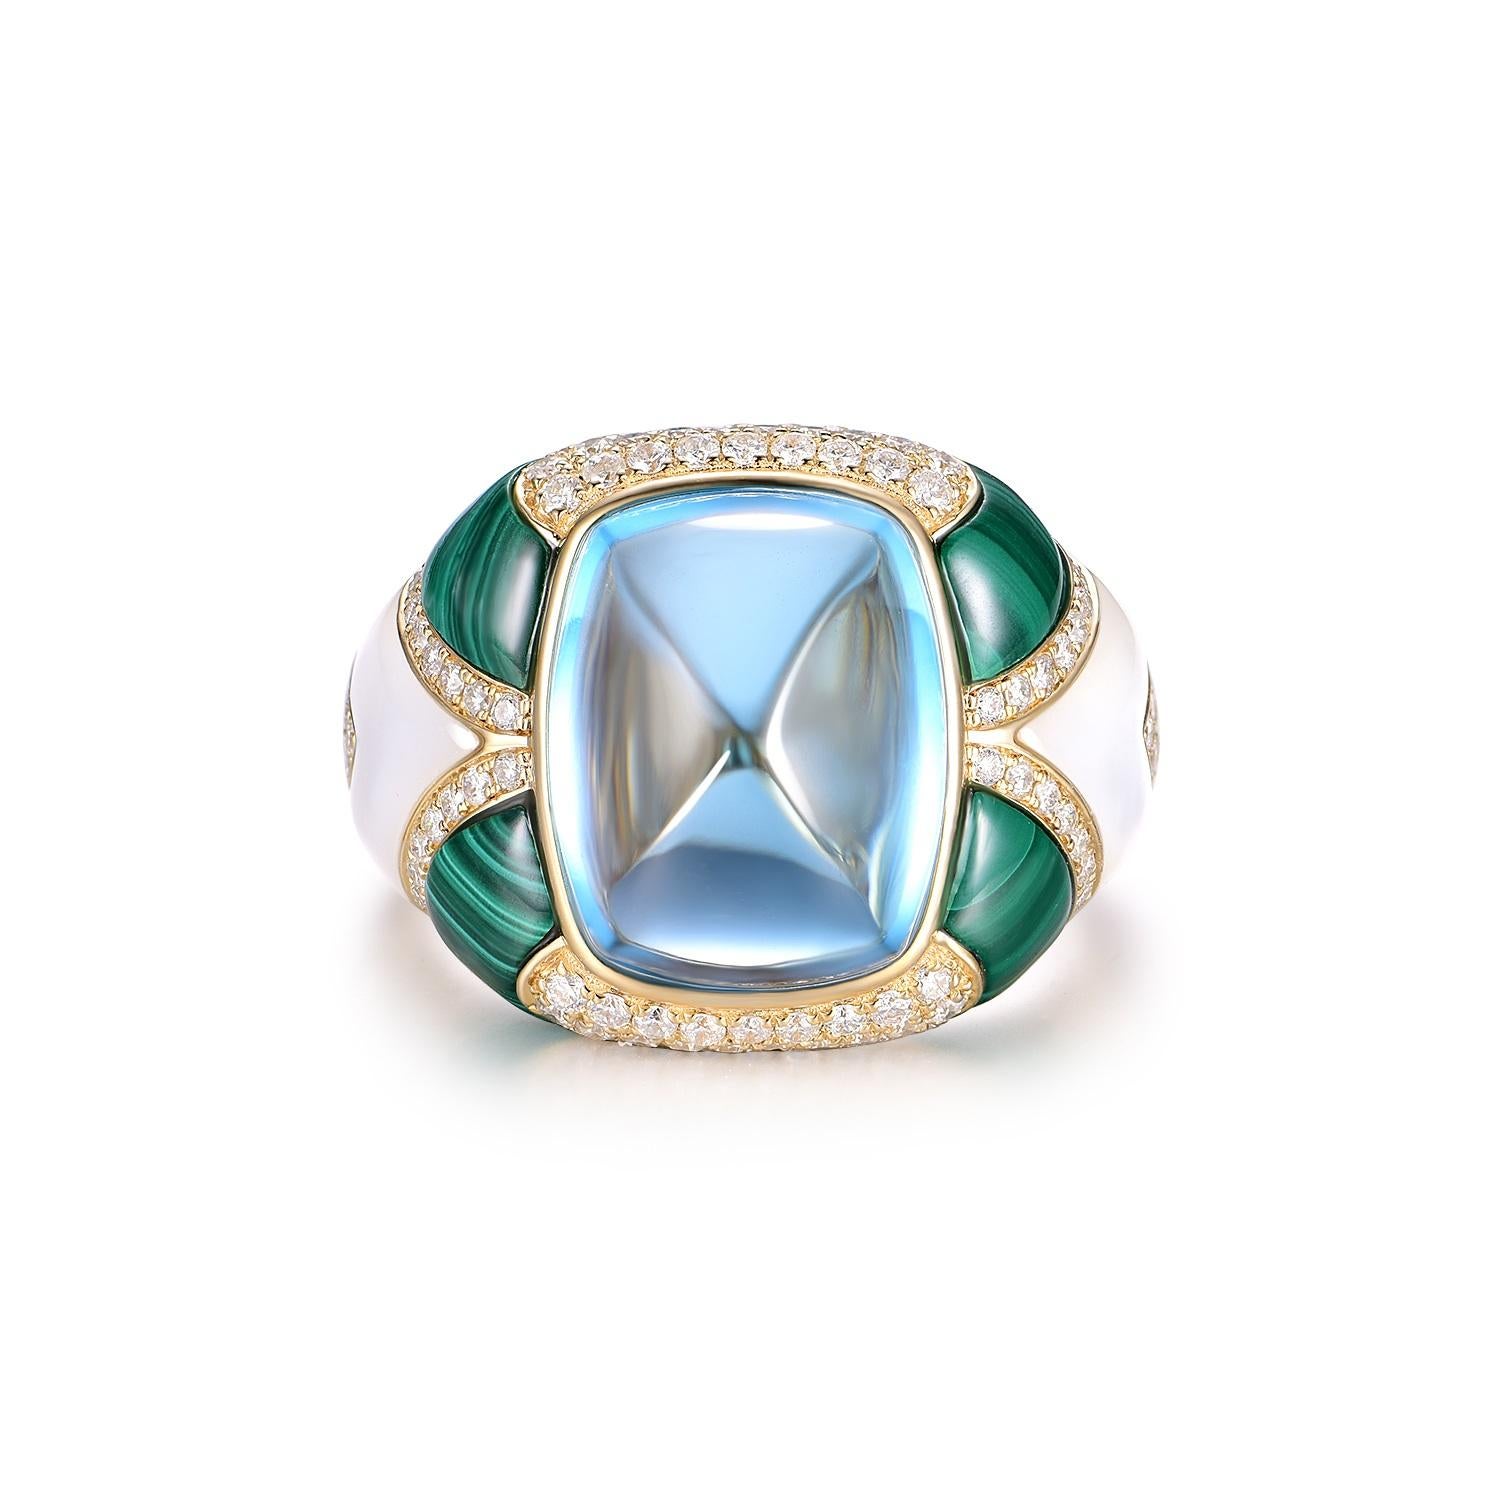 This ring, a size US 6.5 with available resizing options, is a striking creation in 14-karat yellow gold. It features a sizable 11.05-carat blue topaz as its centerpiece. The topaz, with its tranquil blue hue, is cut to a smooth dome, reflecting